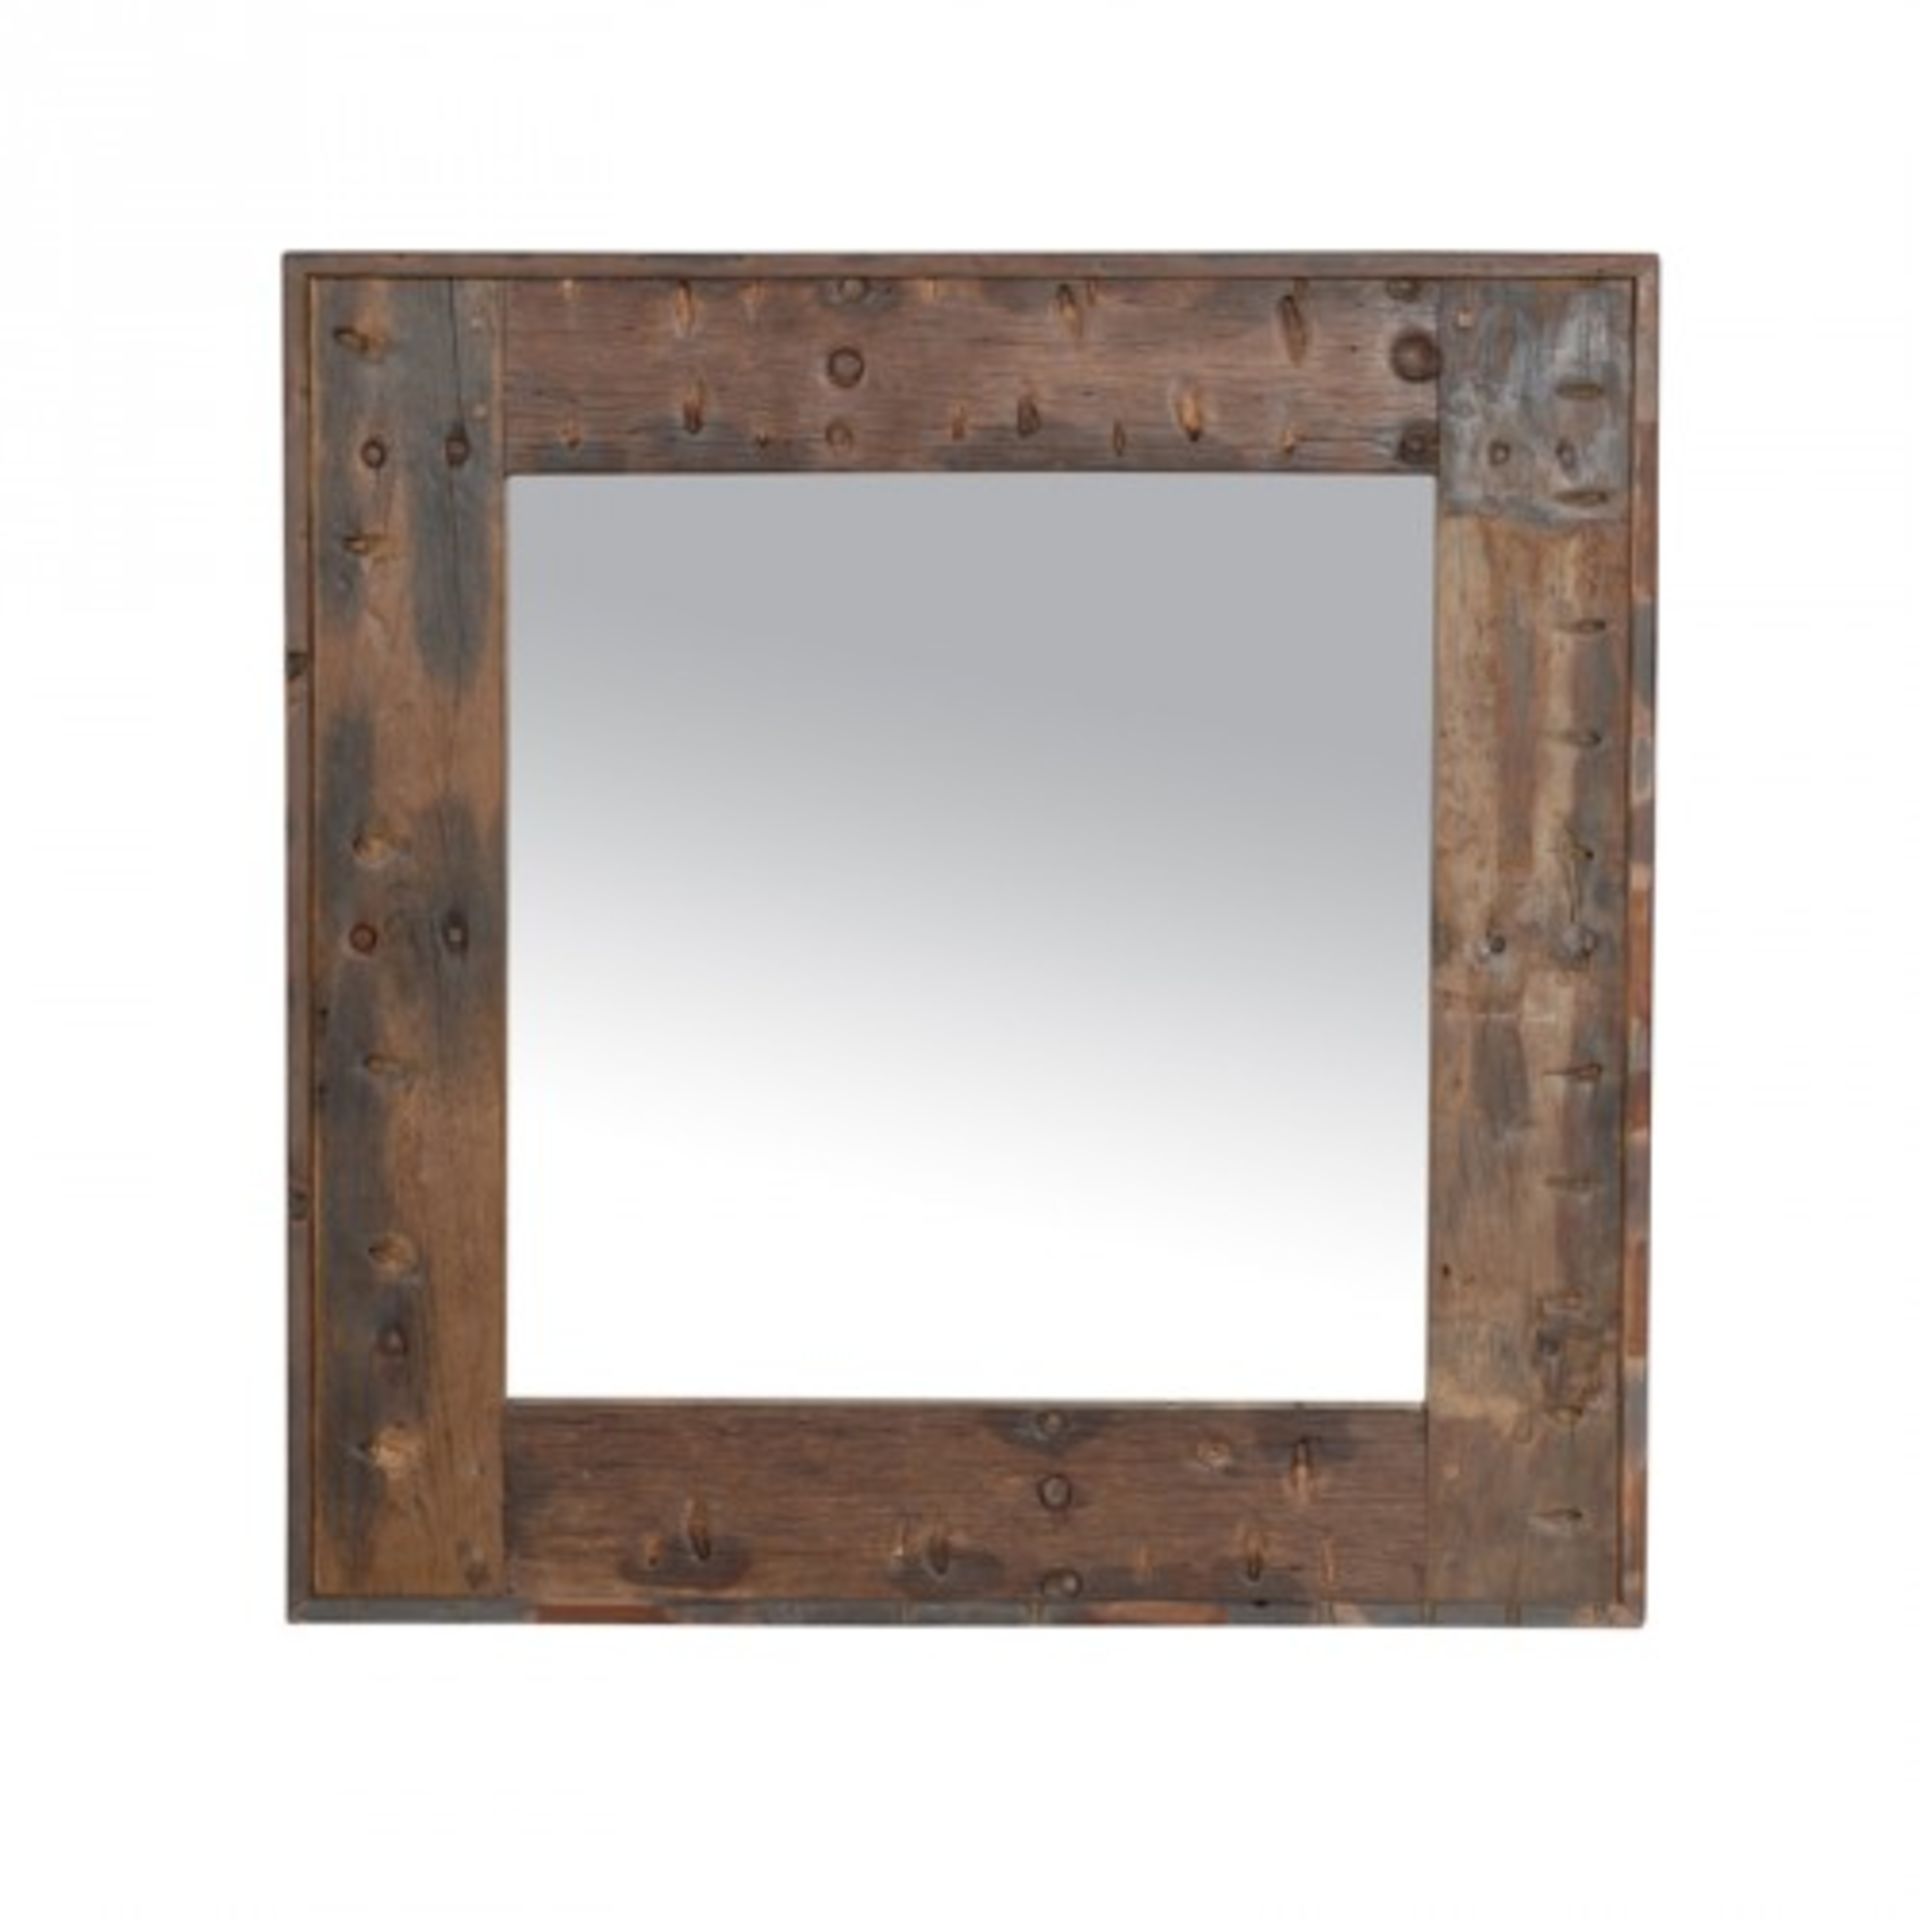 Axel Square Mirror Natural The Axel Mirror Crosses Old World And Industrial With Its Combination - Image 2 of 2